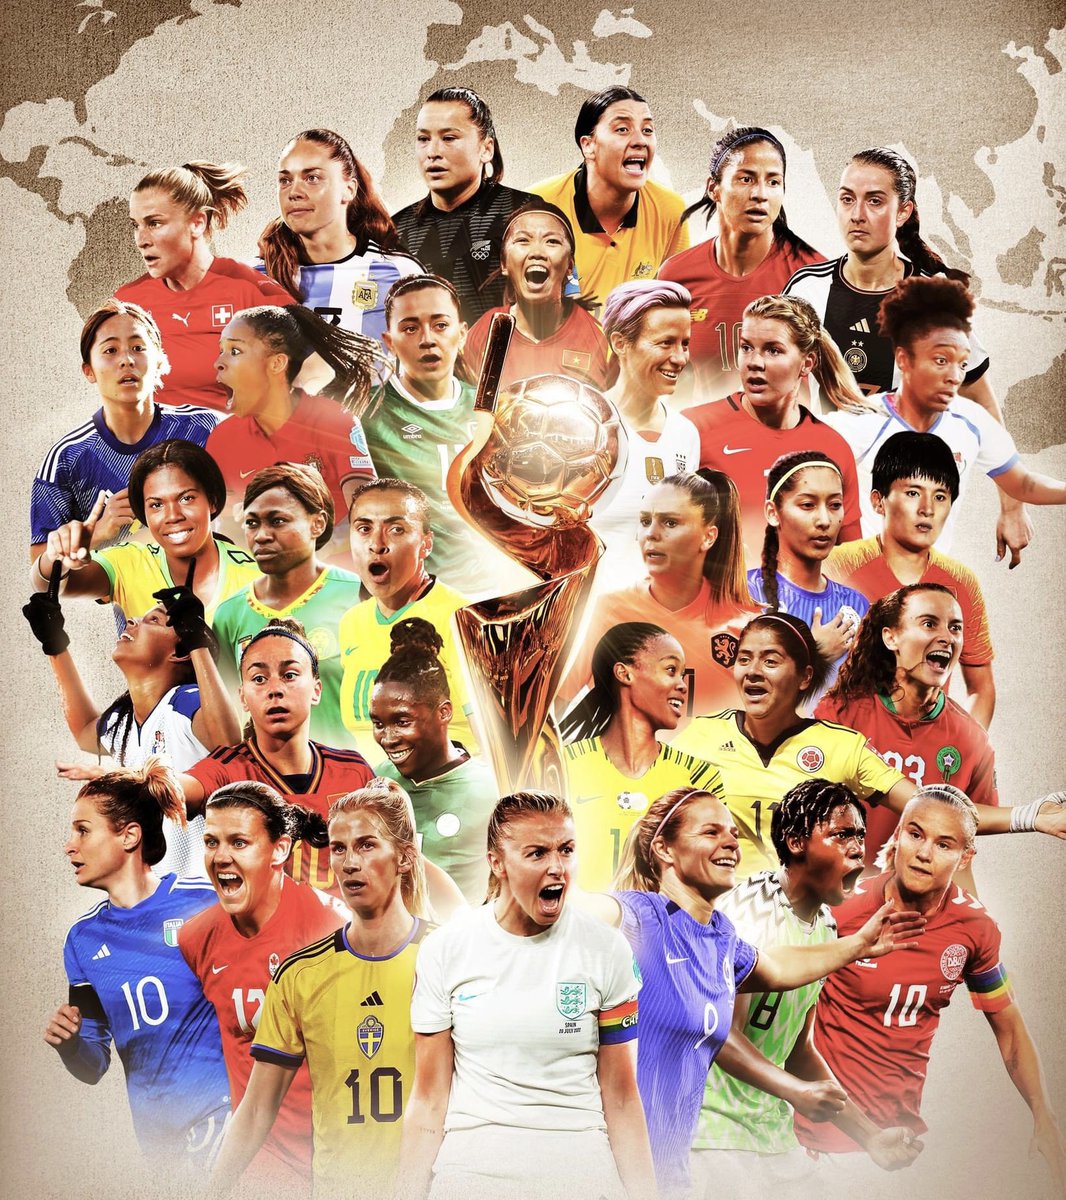 50 days to the @FIFAWWC - rosters being finalized shortly… I’m curious to see who will be the ‘new’ players to step up & embrace the moment and become an international & household name like so many of these legendary players! @USWNT @USWNTPlayers @NWSL